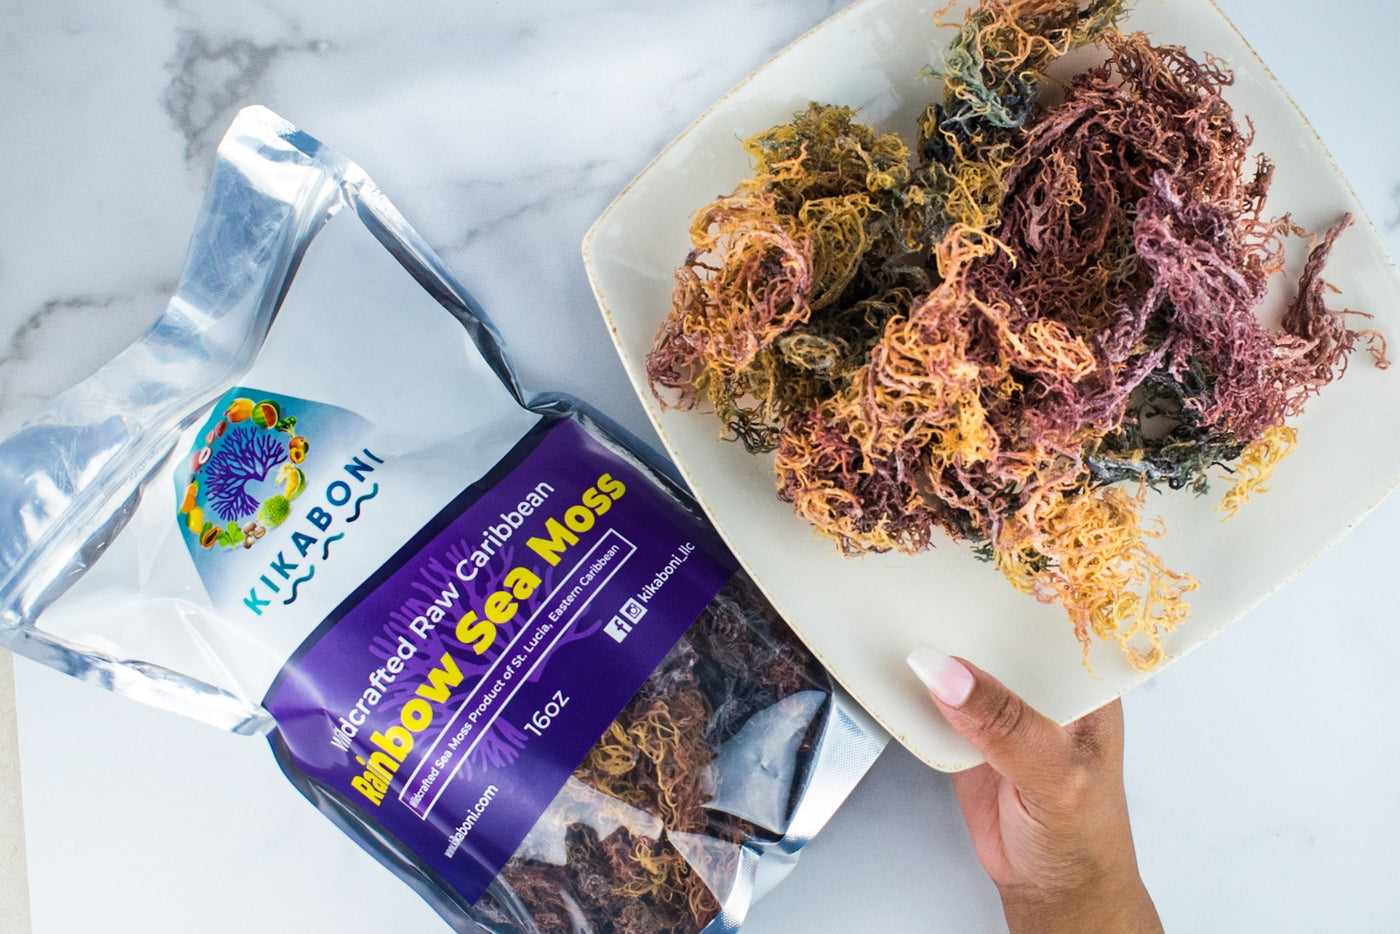 WILDCRAFTED DRIED SEA MOSS